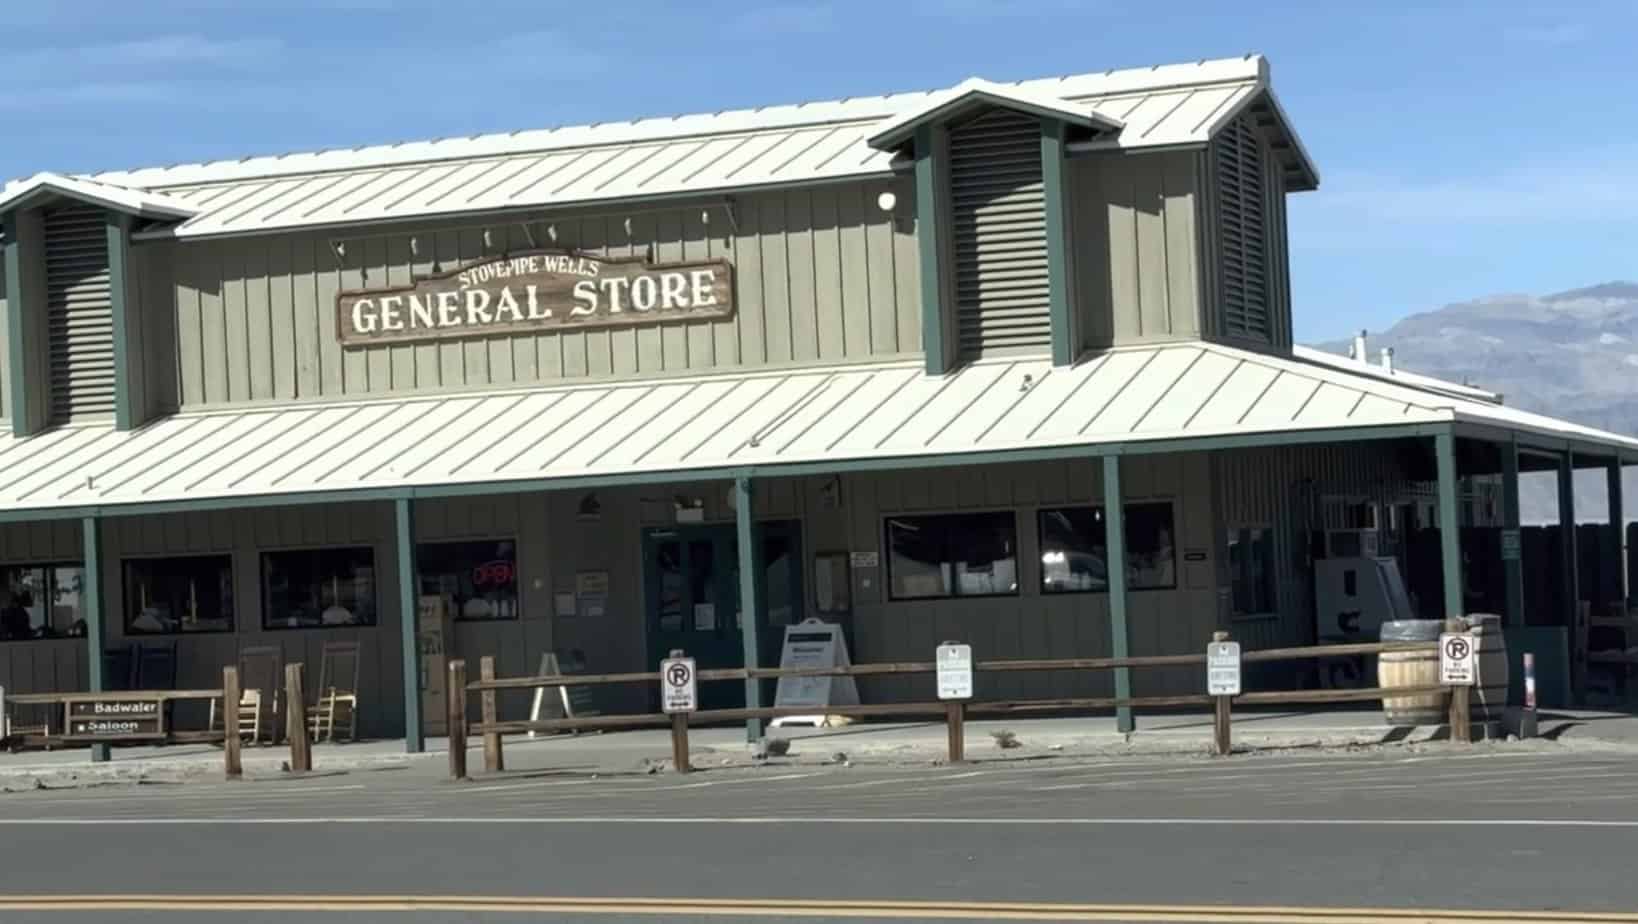 Stovepipes General Store in Death Valley